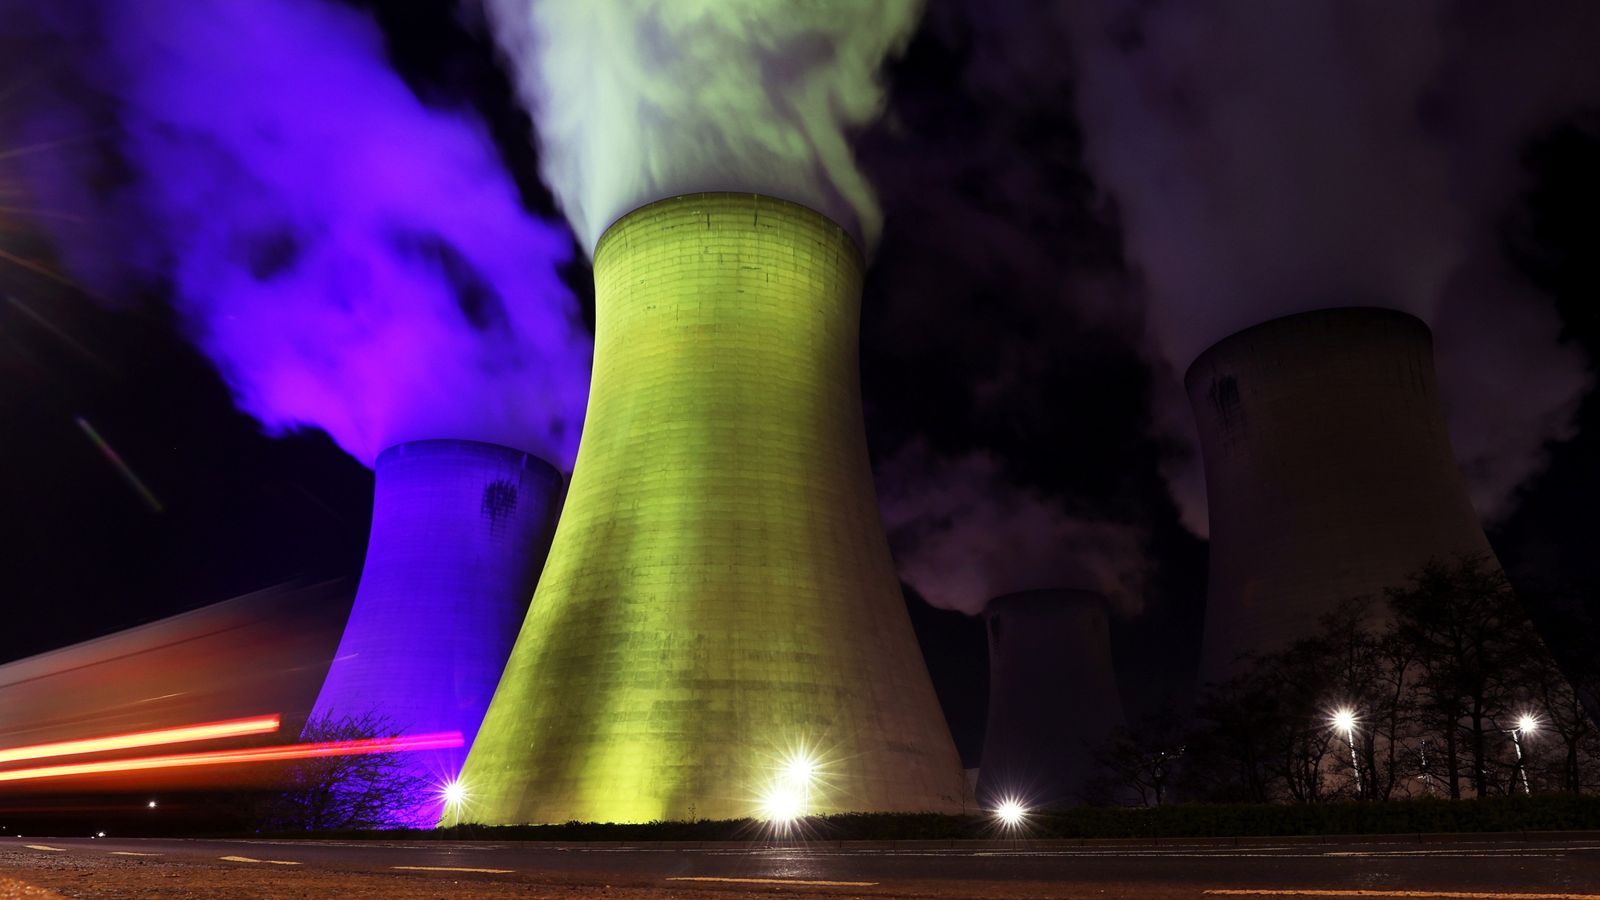 Drax: Subsidies for power giant questioned as annual profits soar